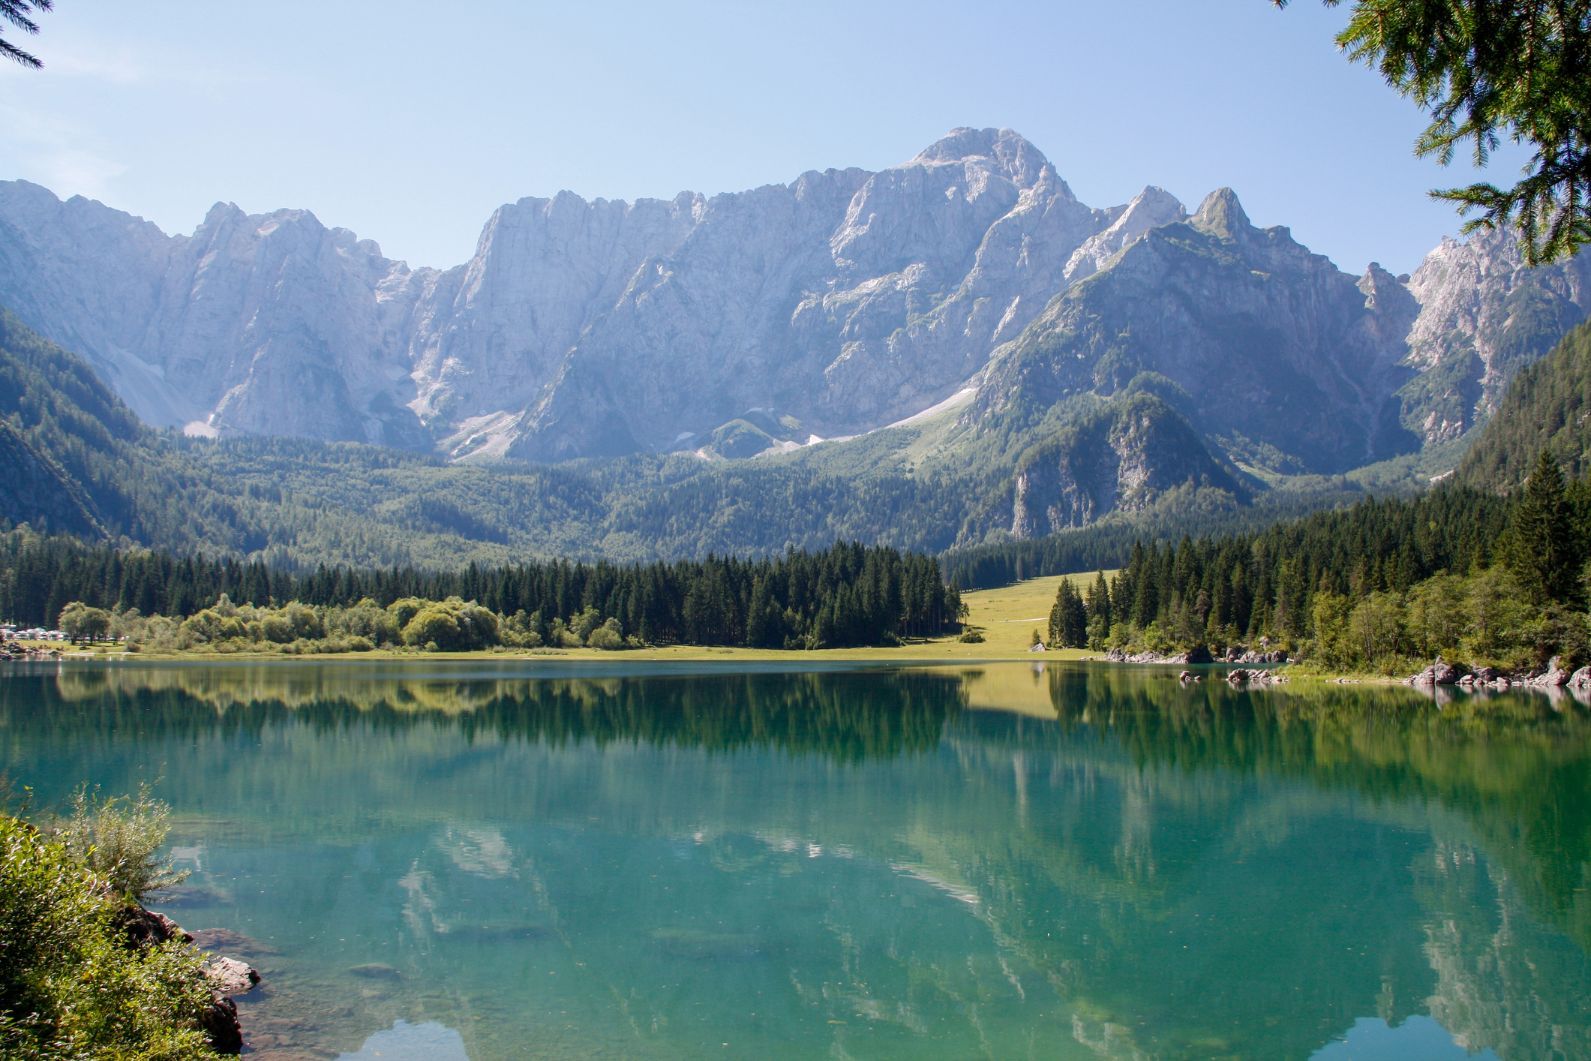 The view towards the high peaks, in Triglav National Park in Slovenia. Photo: Getty